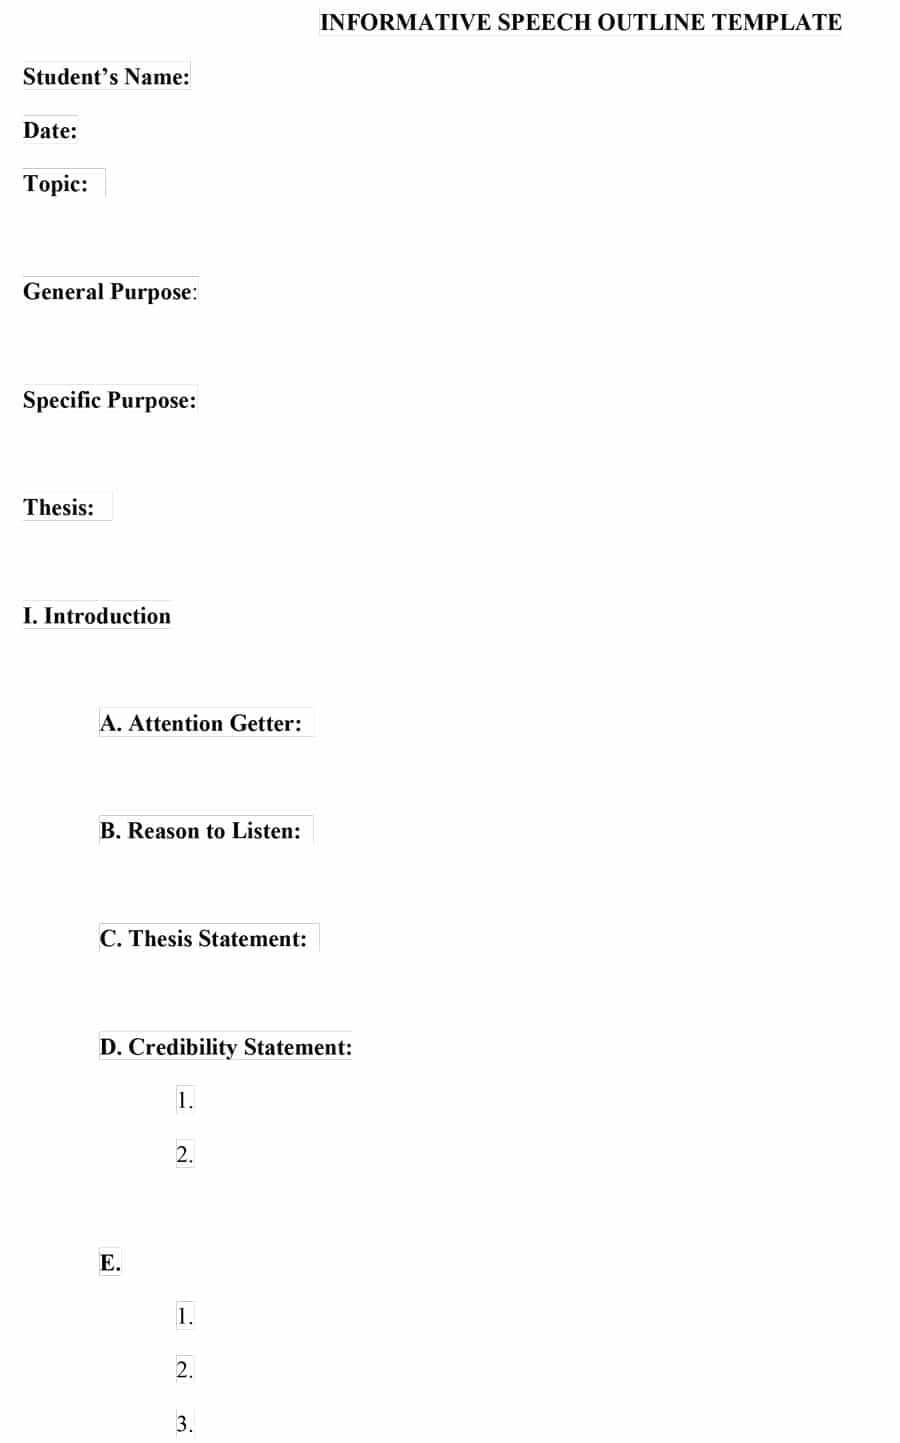 43 Informative Speech Outline Templates & Examples Intended For Speech Outline Template Word